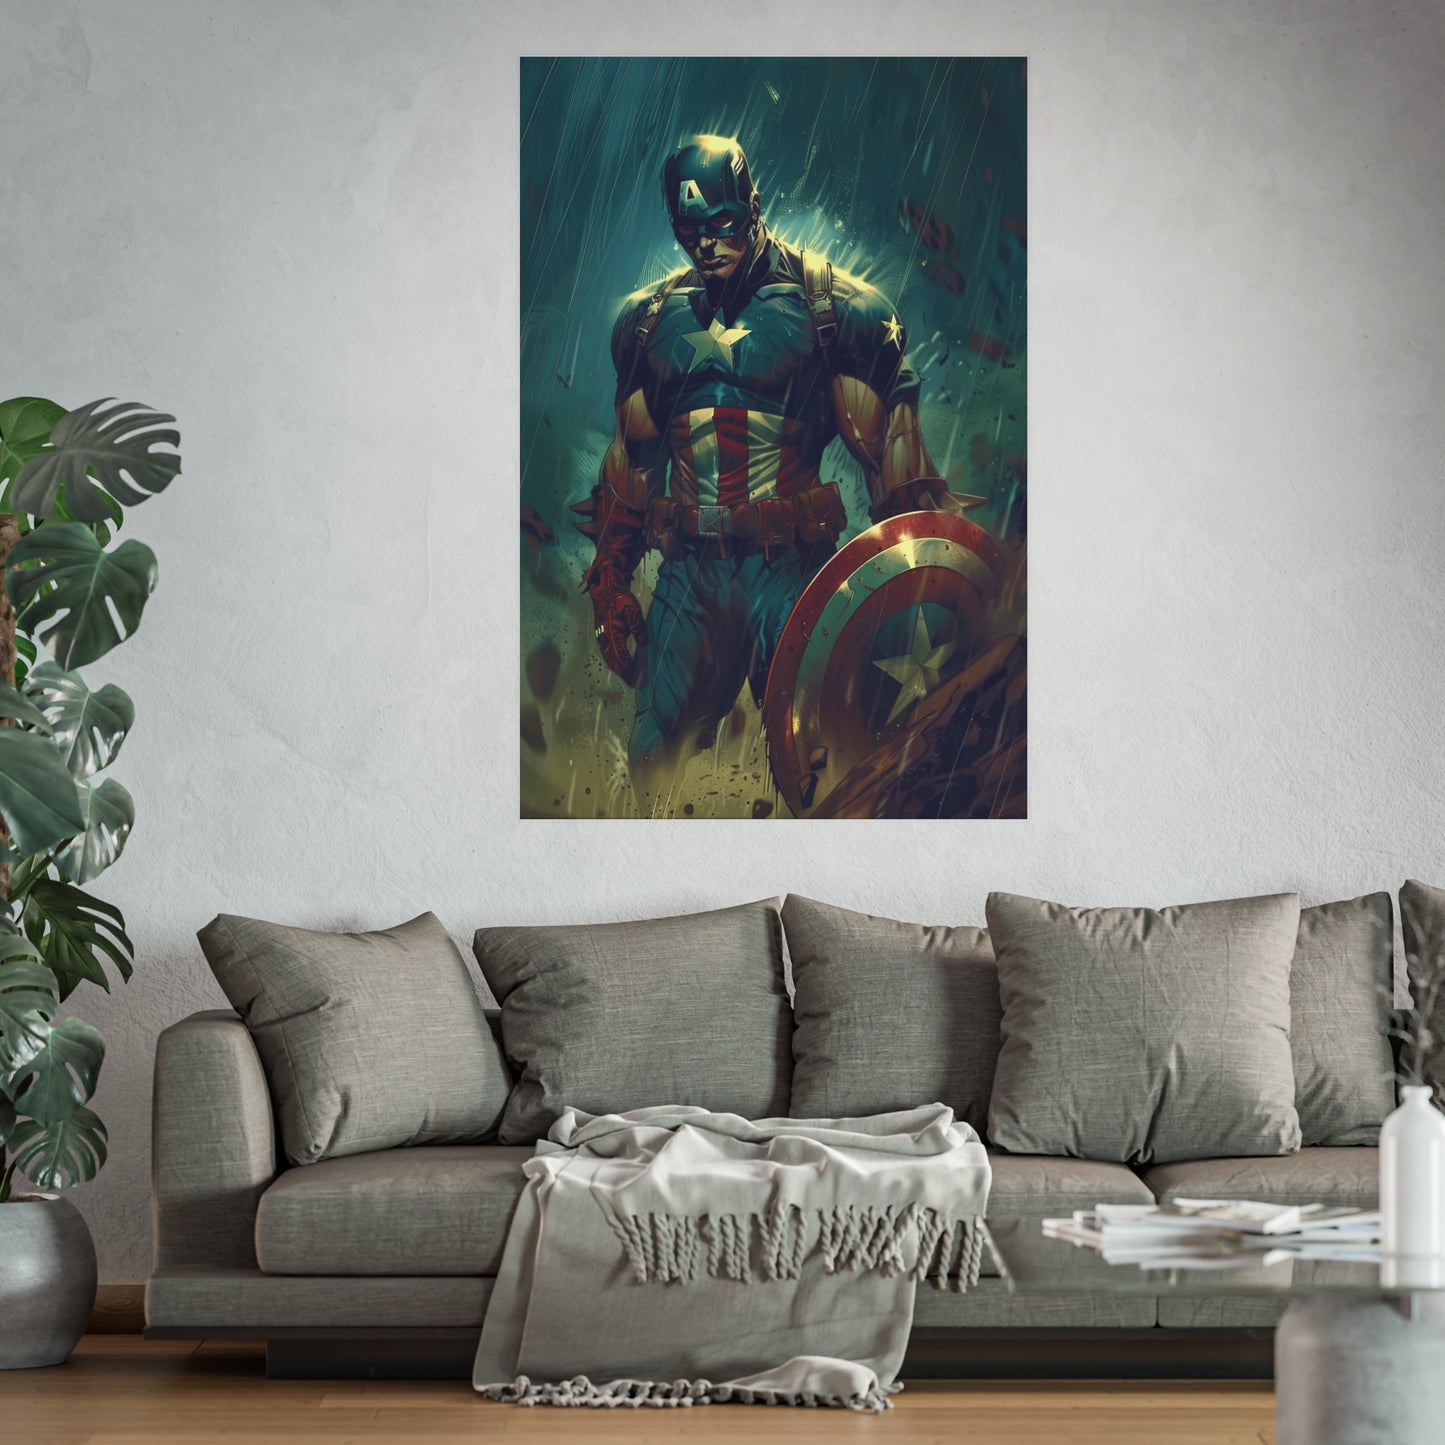 Satin and Archival Matte Posters: Captain America (inspired by Marvel)